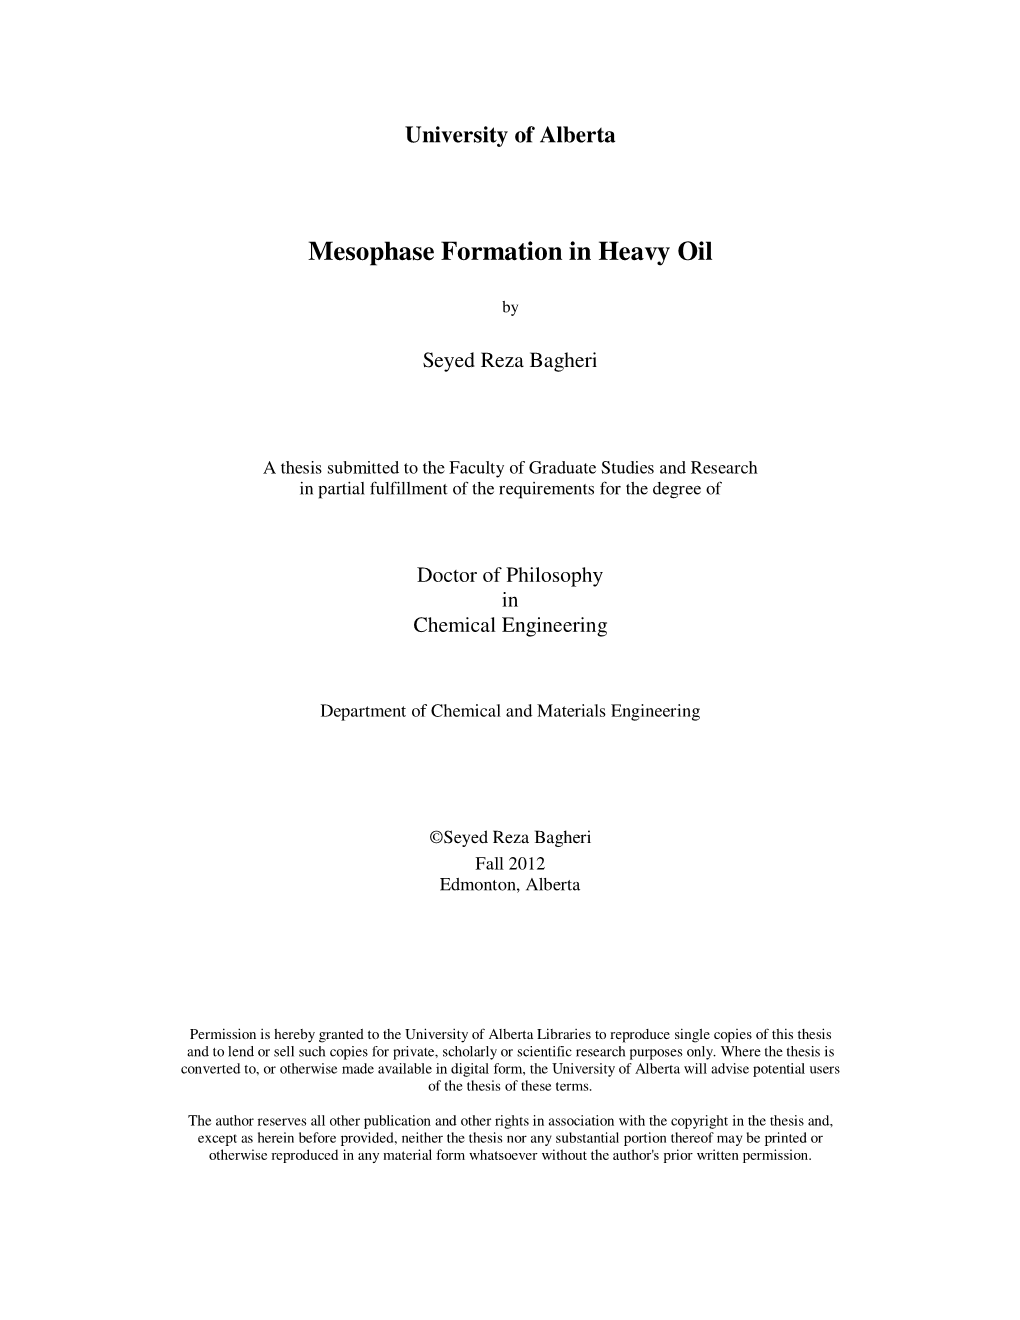 Mesophase Formation in Heavy Oil